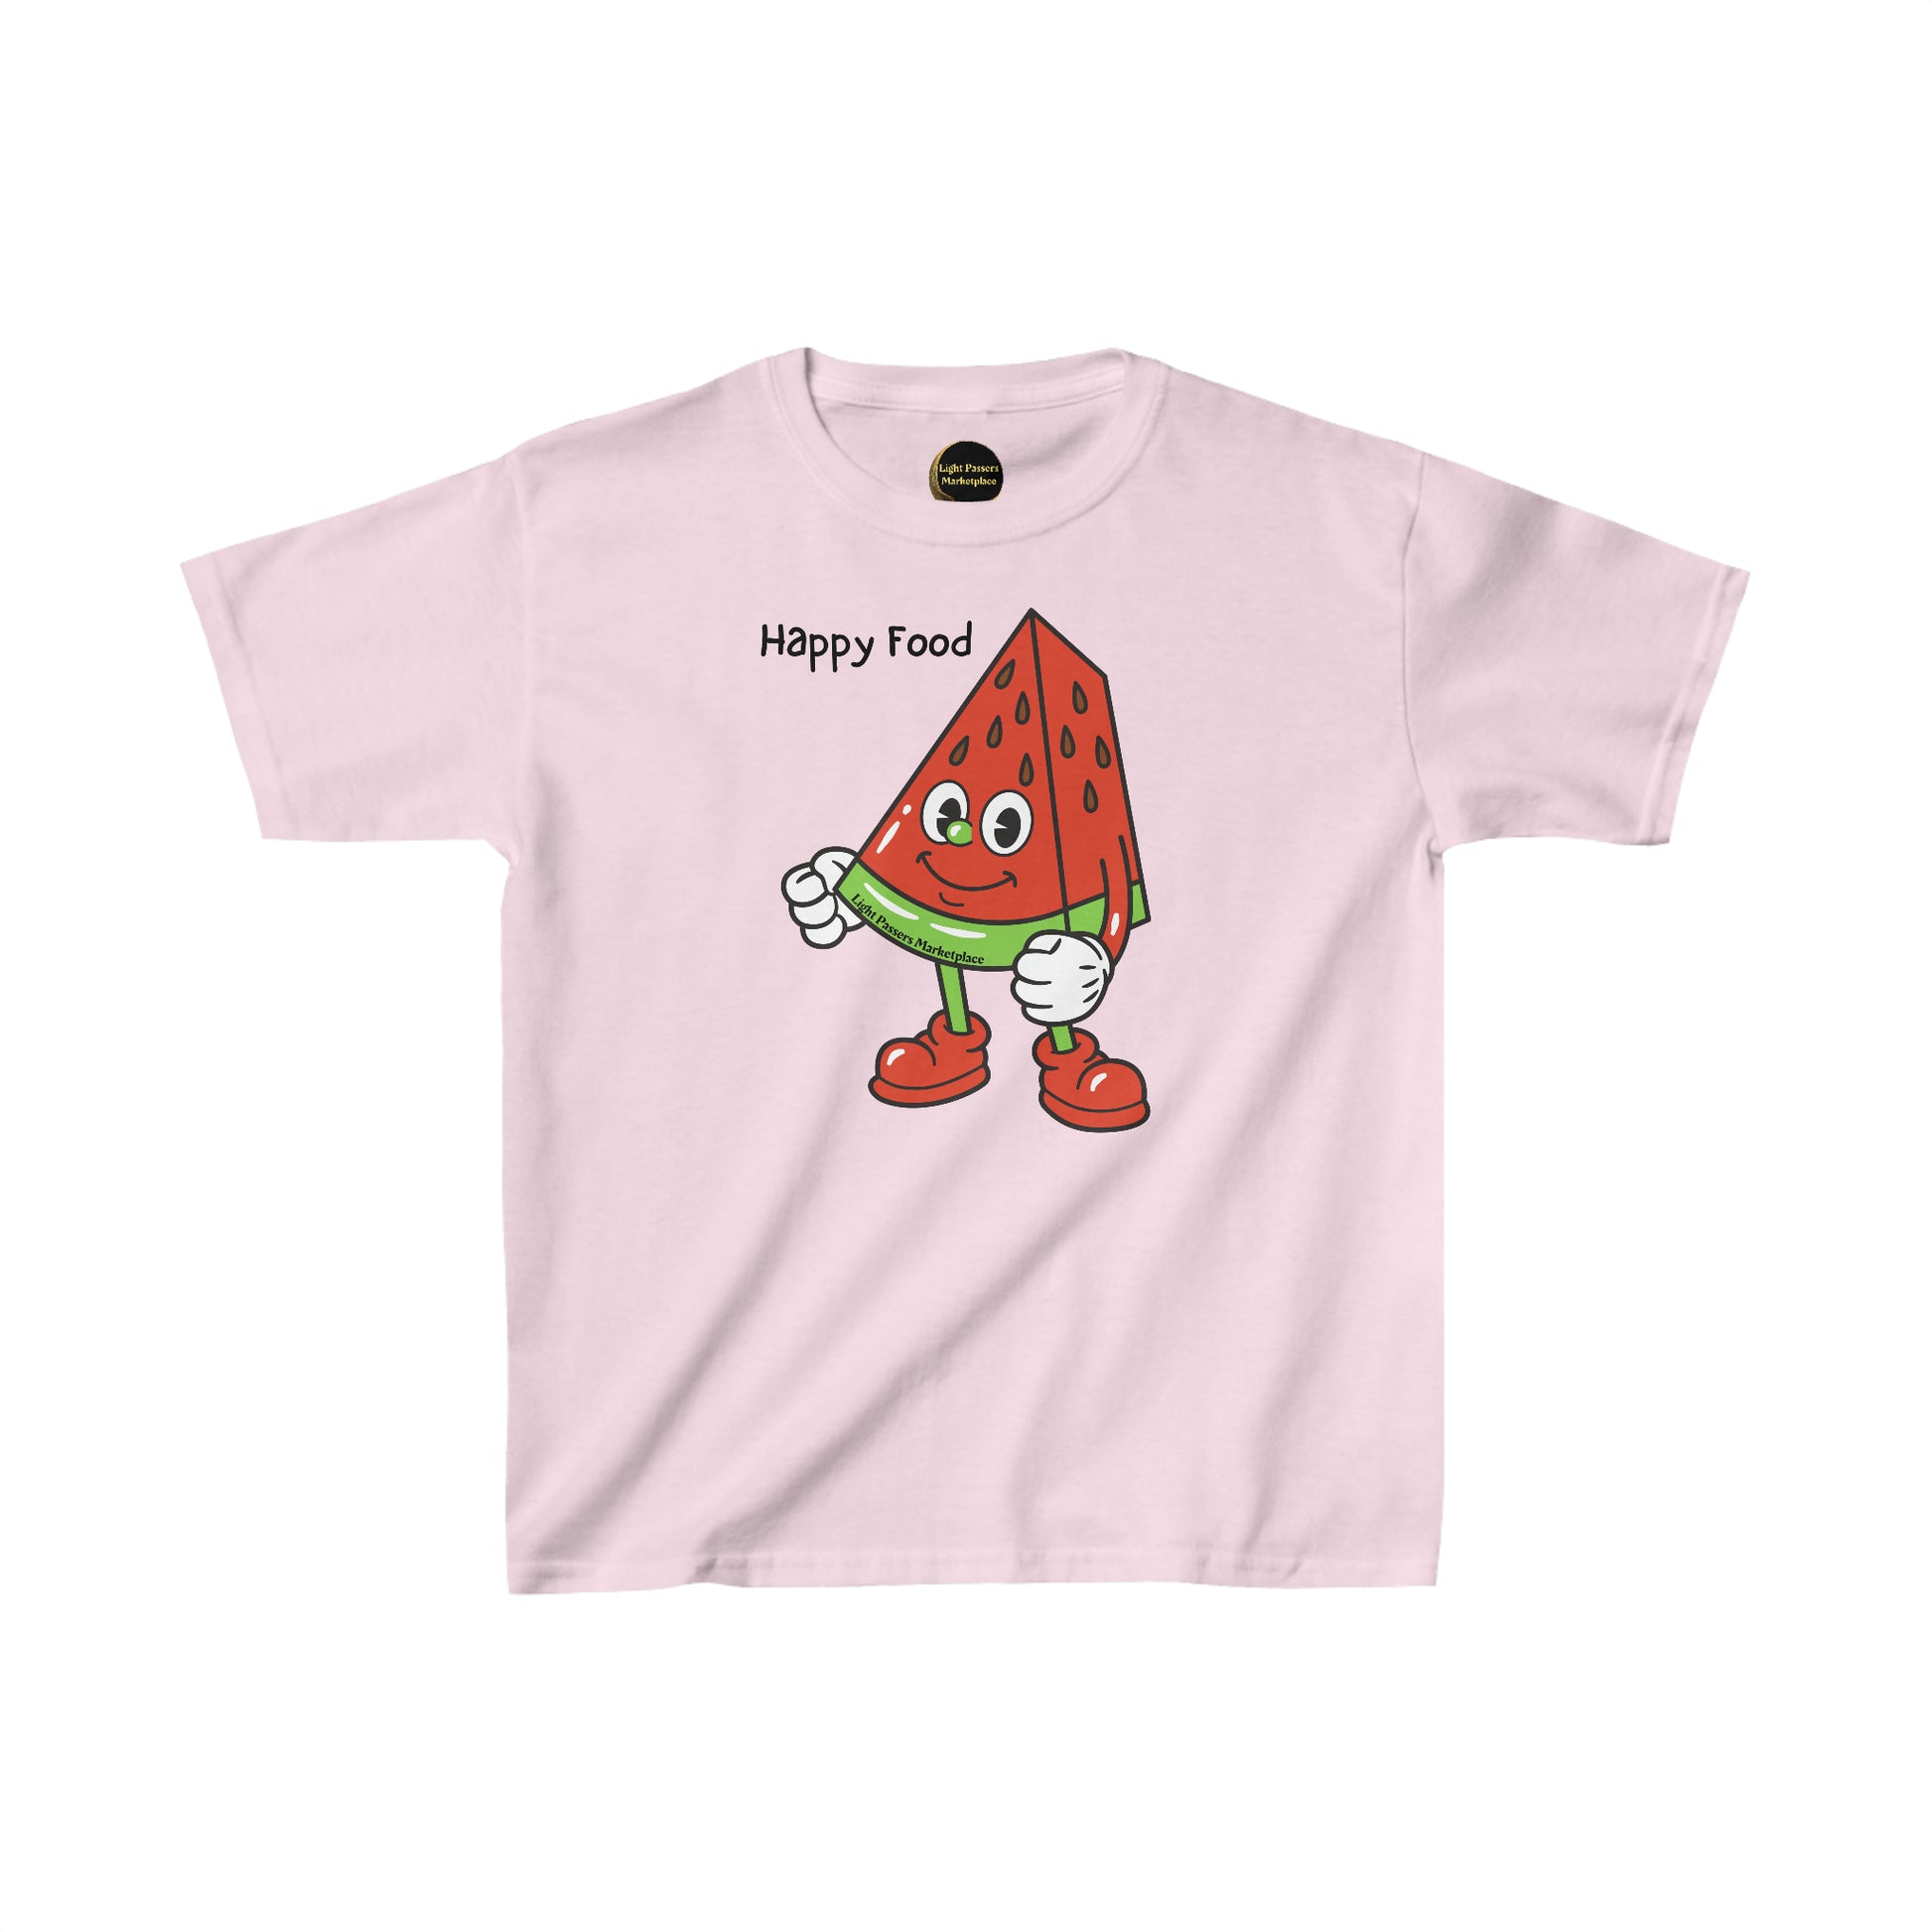 Youth t-shirt featuring a cartoon watermelon character, made of 100% cotton with twill tape shoulders for durability. Curl-resistant collar, no side seams, and ethically sourced materials.